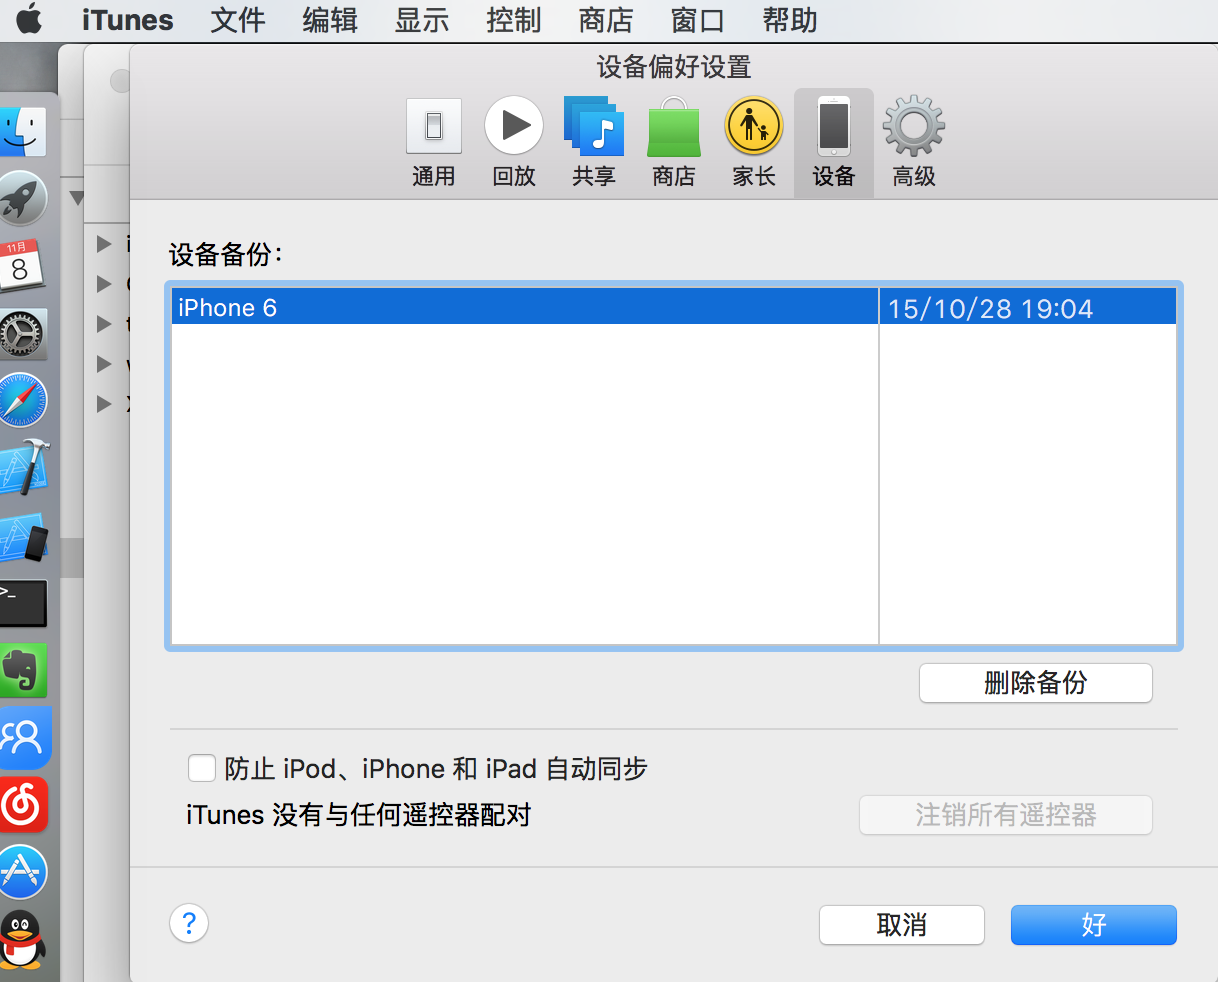 itunes preferences device also show iphone